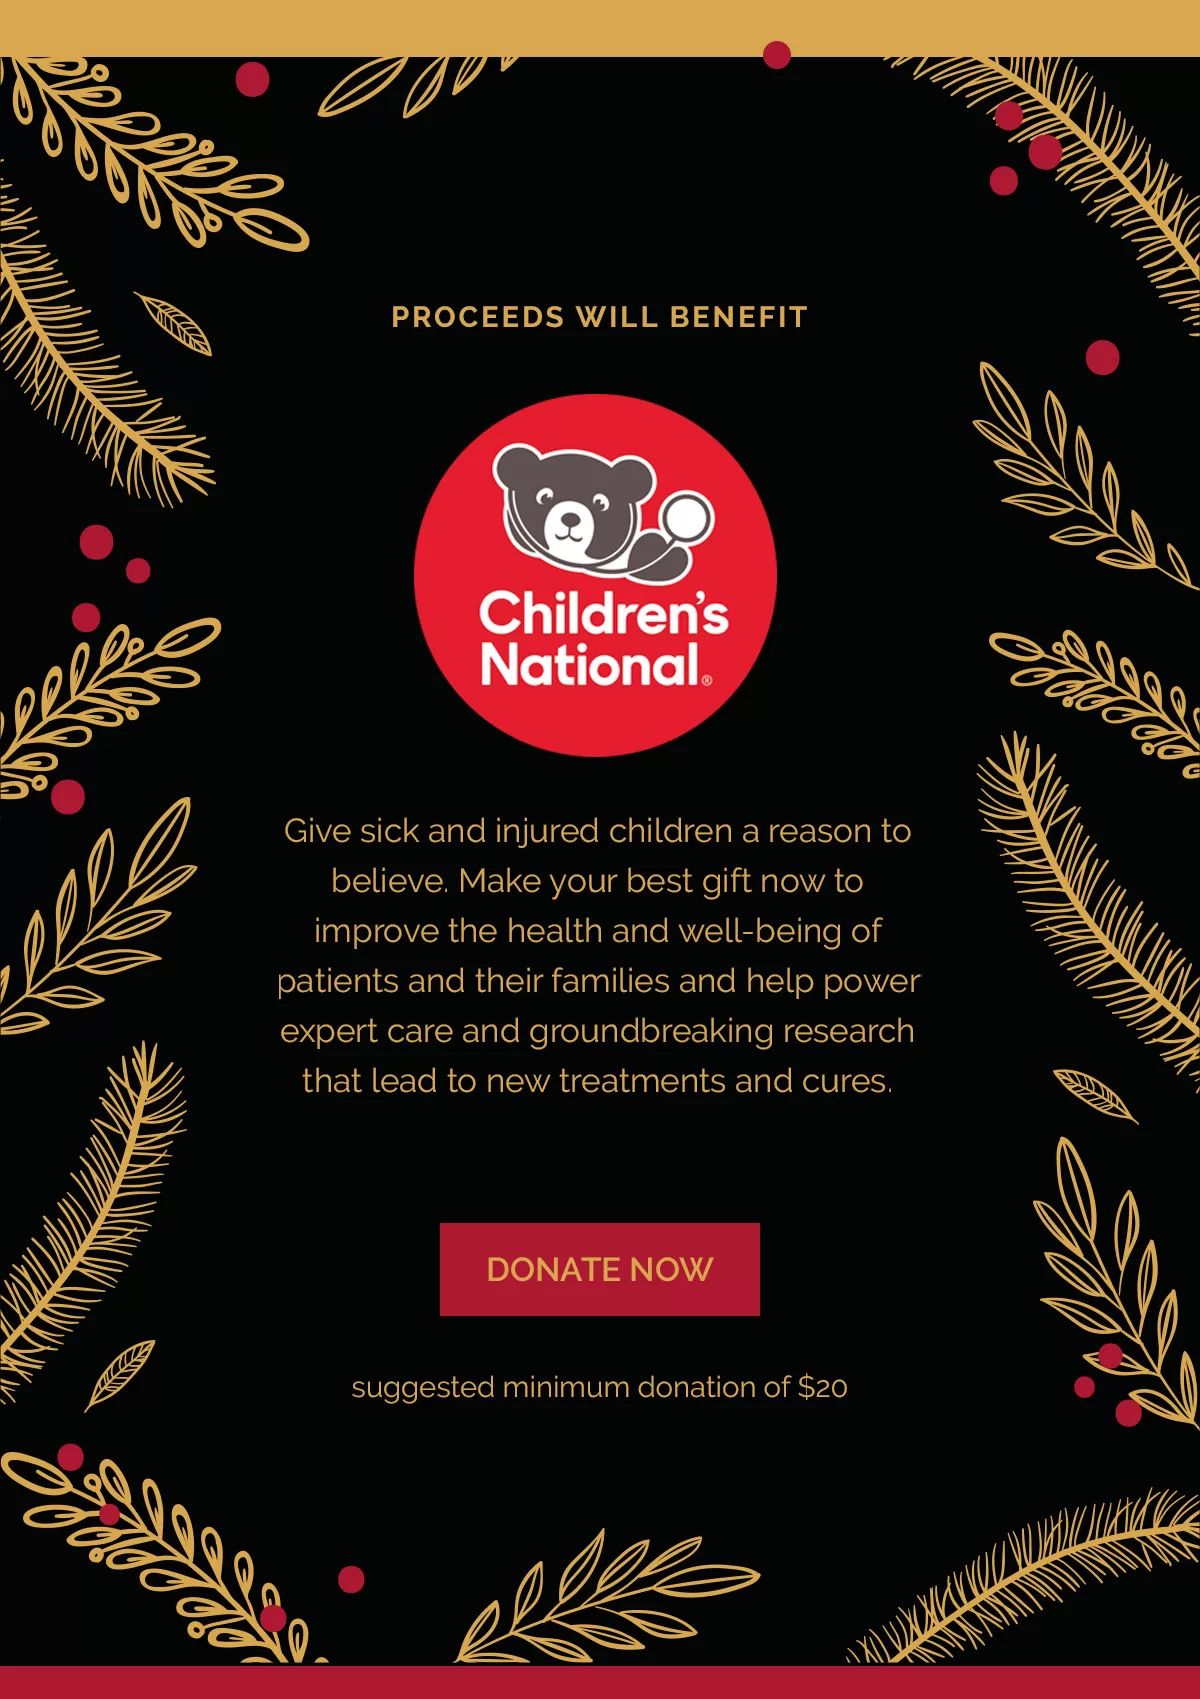 RSVP and Donate for the Holiday Fete benefitting Children's National Hospital